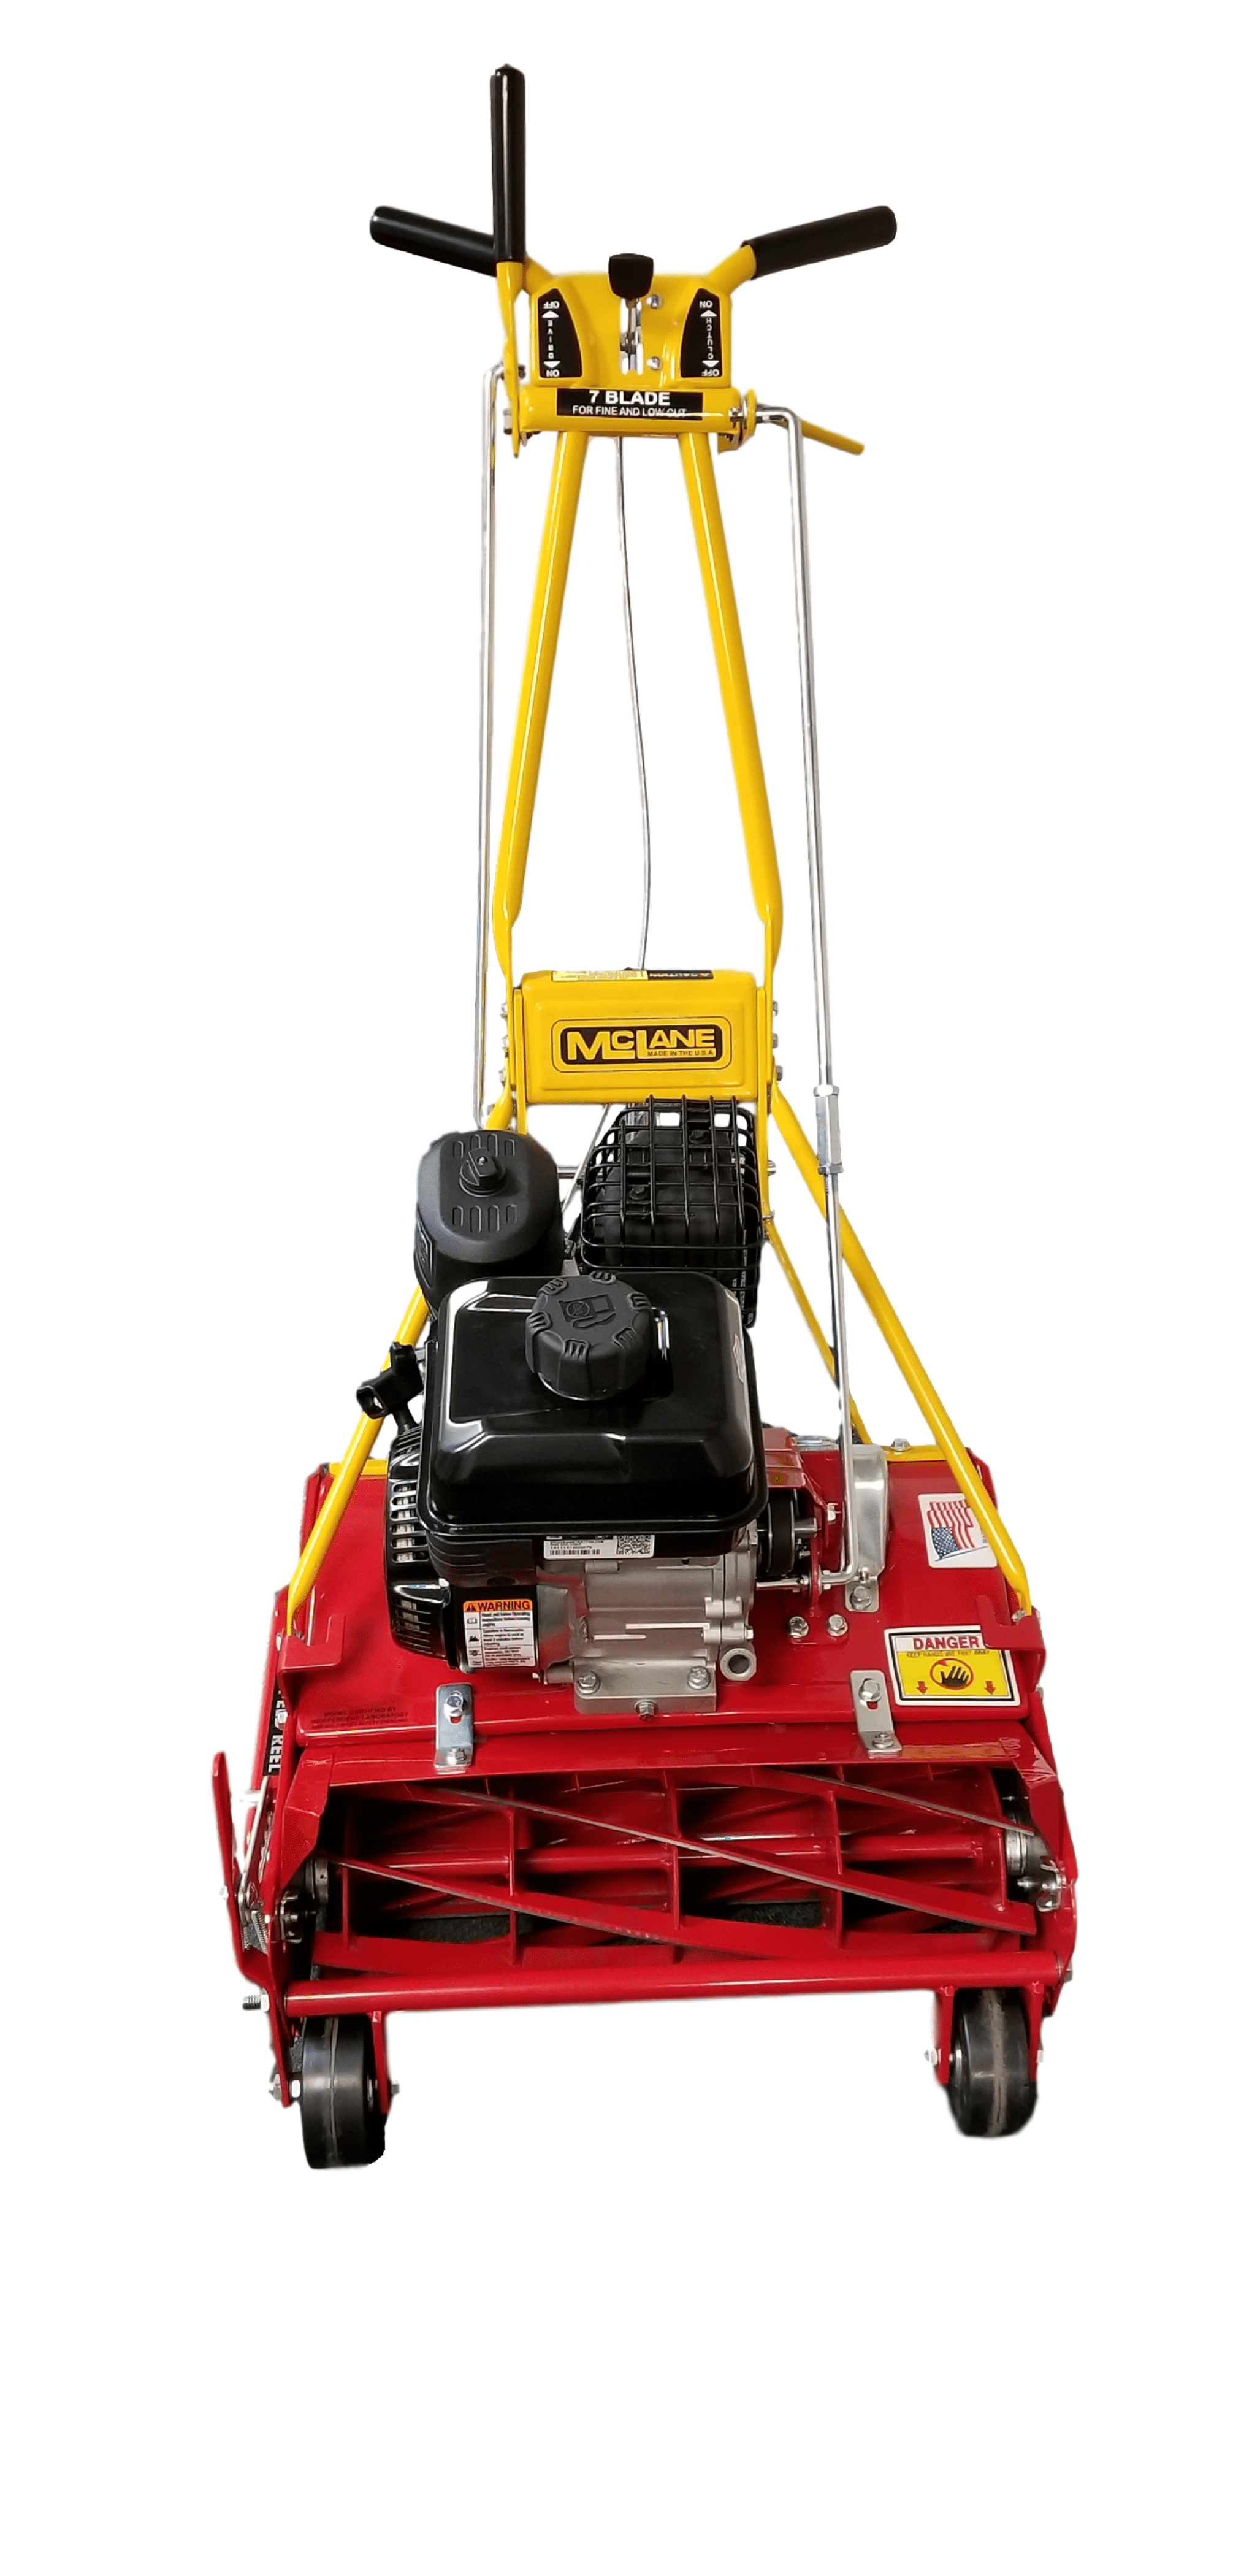 McLane 20 Front-Throw Reel Mower with Touch-a-matic Engine Clutch